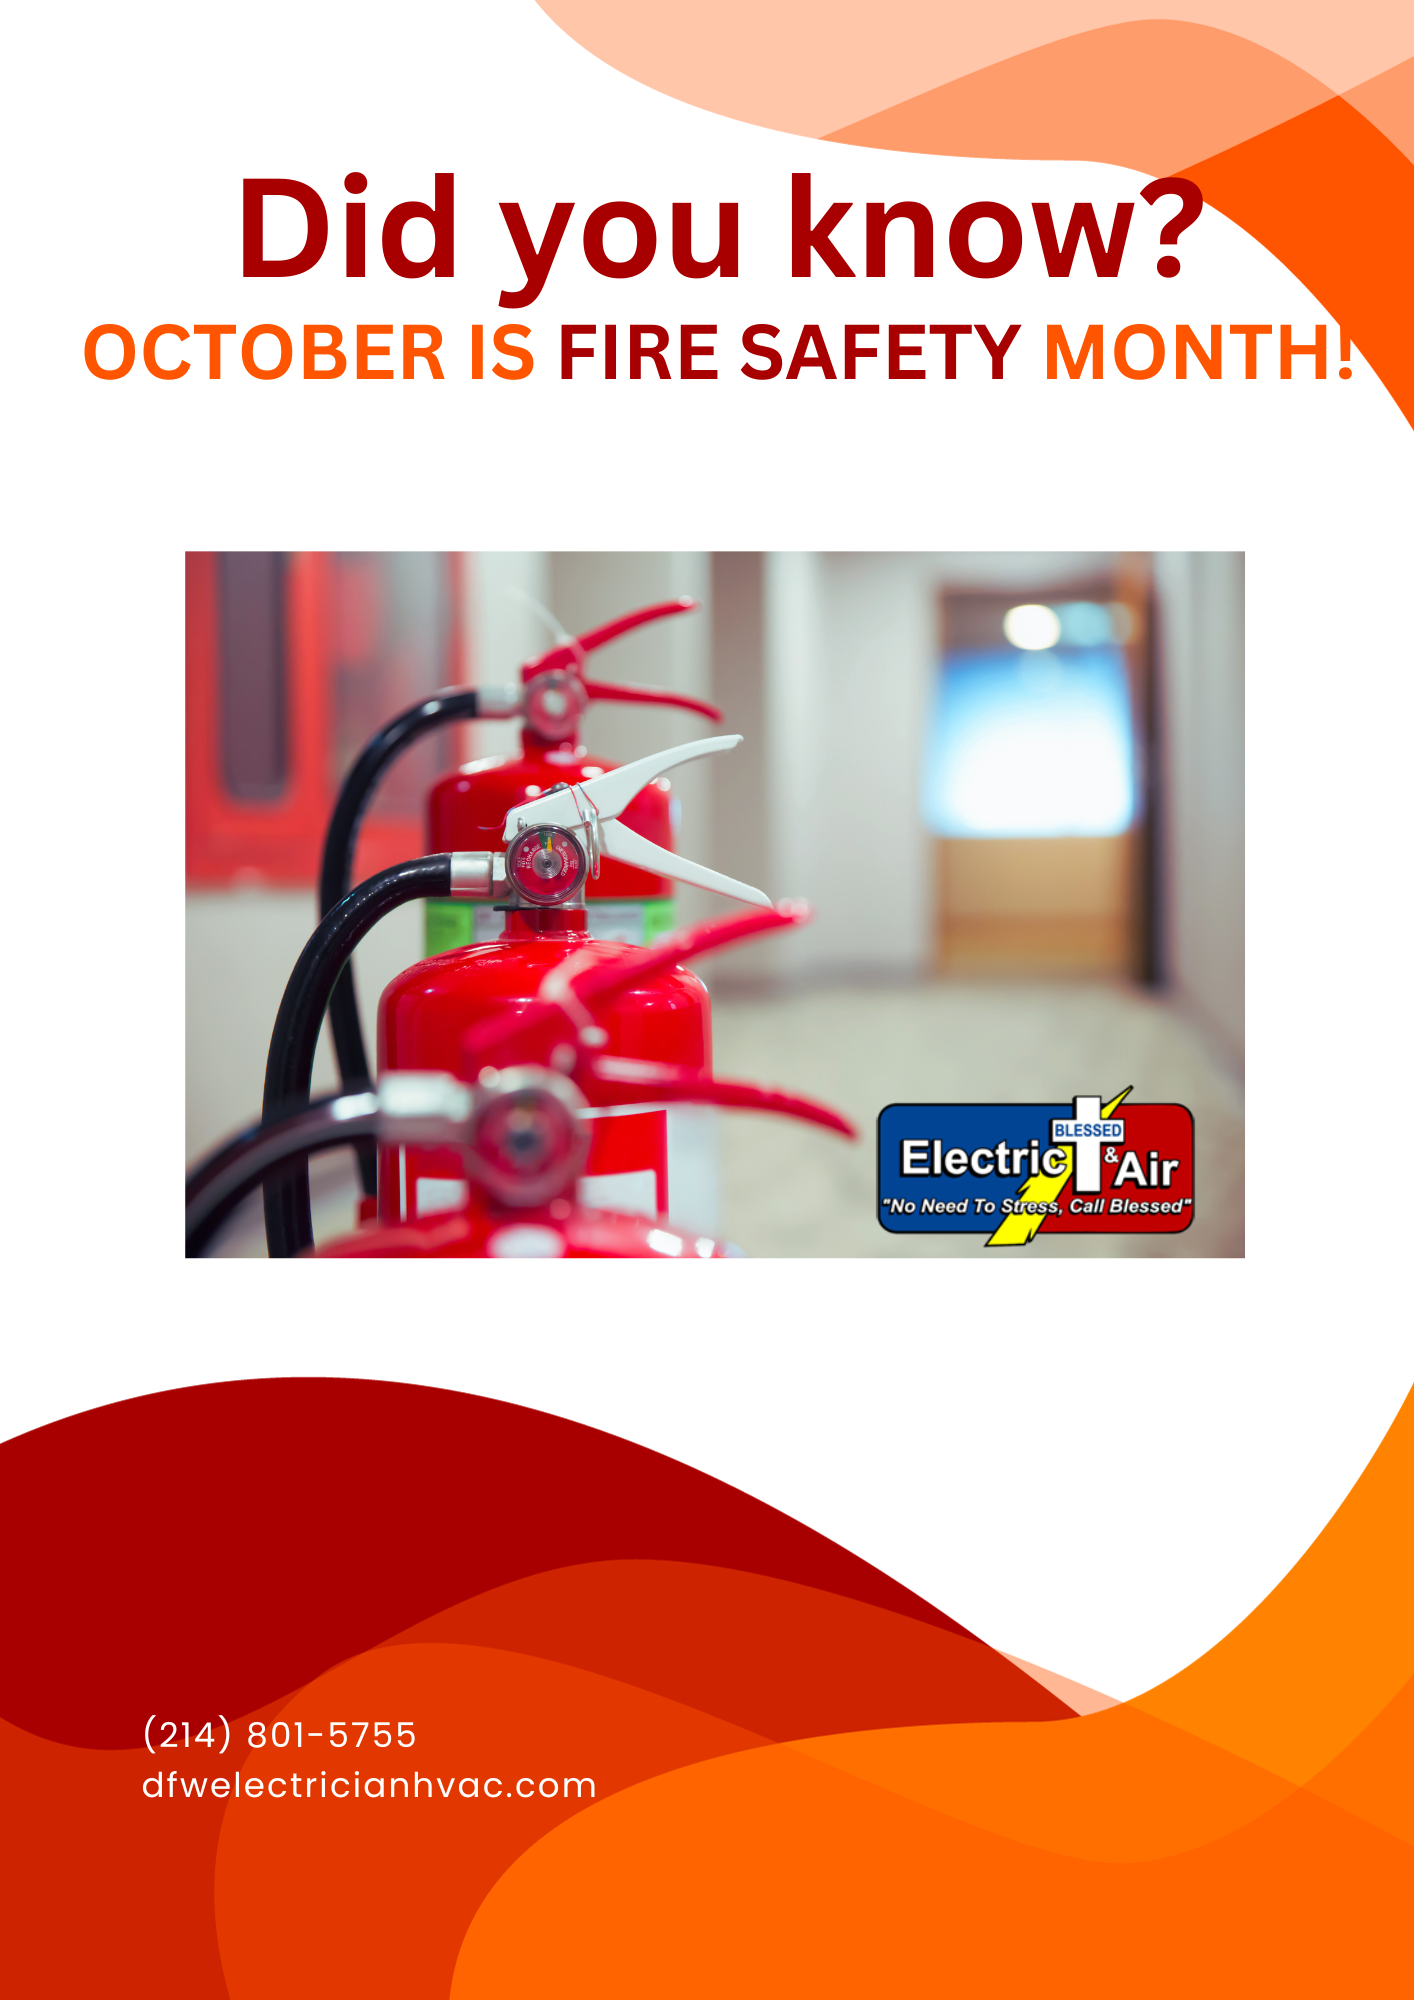 Tips for Fire Safety